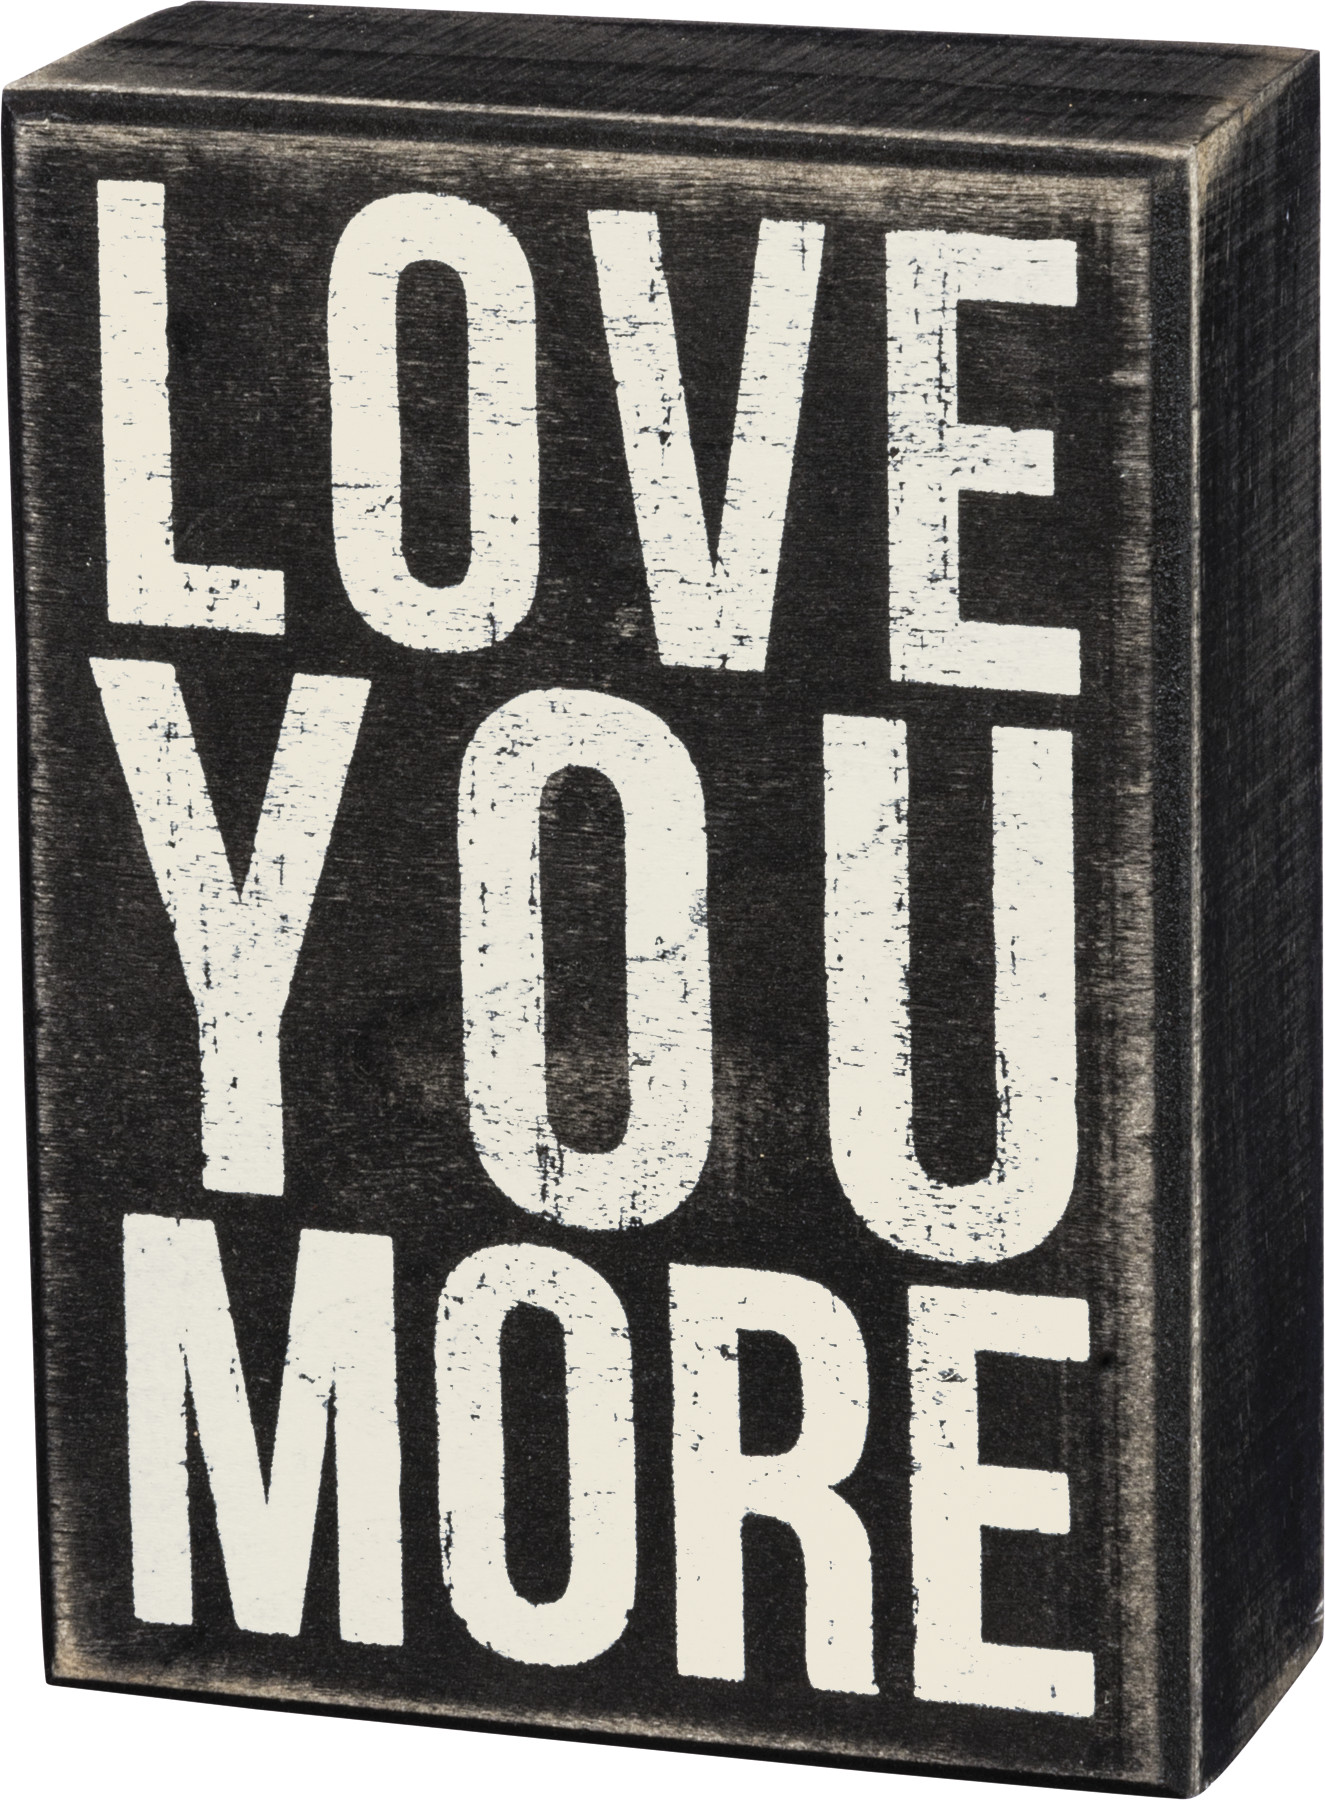 Primitives by Kathy I FREAKING LOVE YOU Wooden Box Sign 3" x 4"